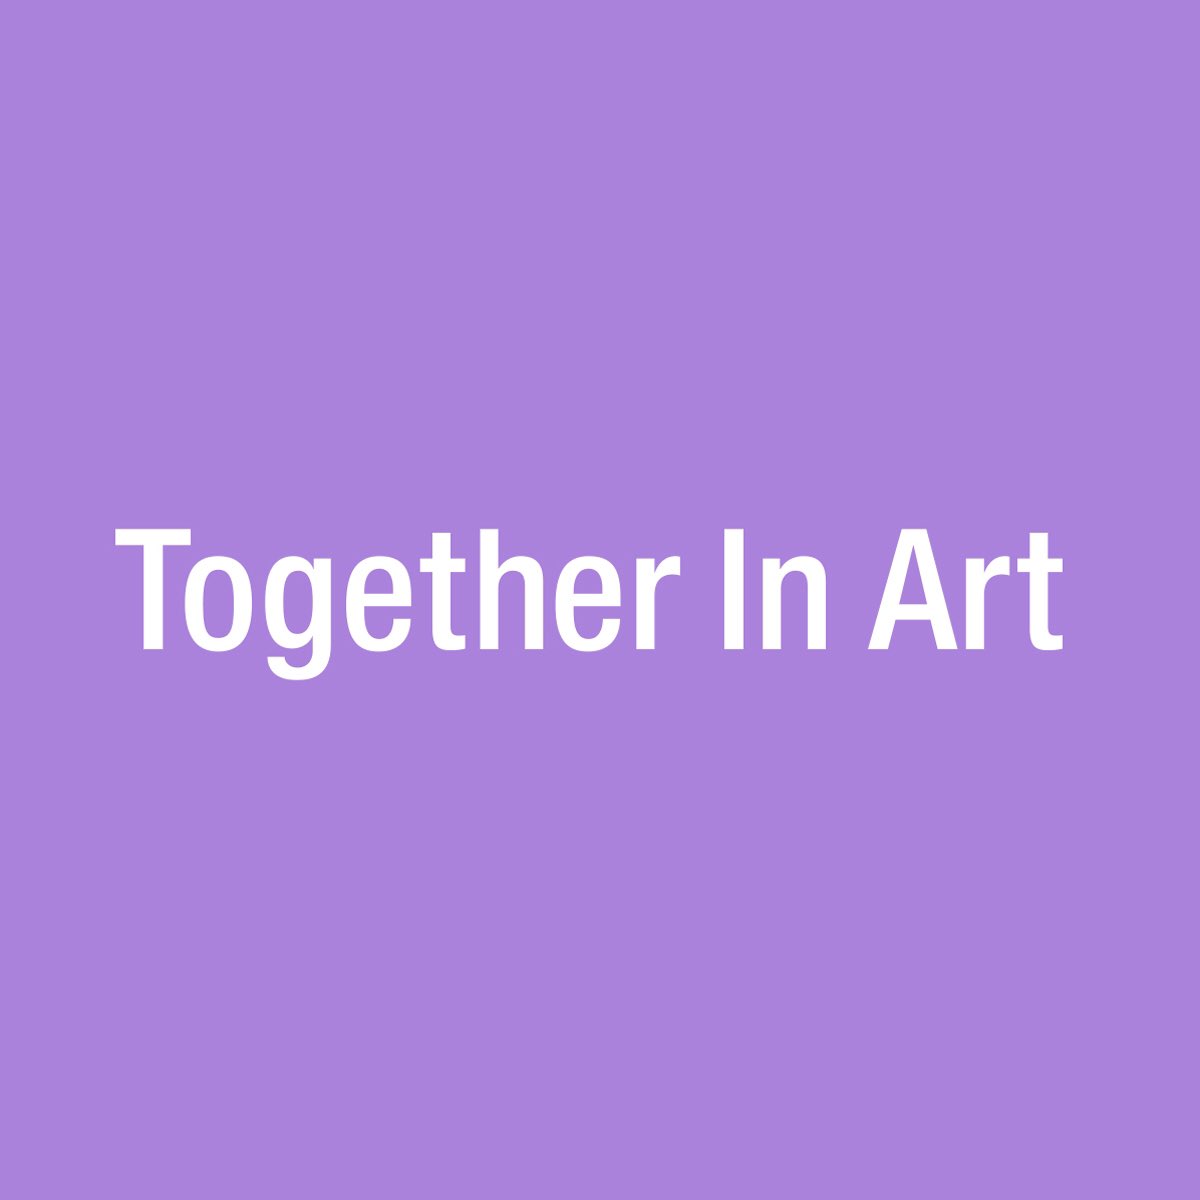 I am delighted the @ArtGalleryofNSW is collaborating with artists, musicians, performers and workers in the creative industries to commission new works and connect artists with audiences online with #togetherinart. See what’s going on at bit.ly/2V1ZXq9